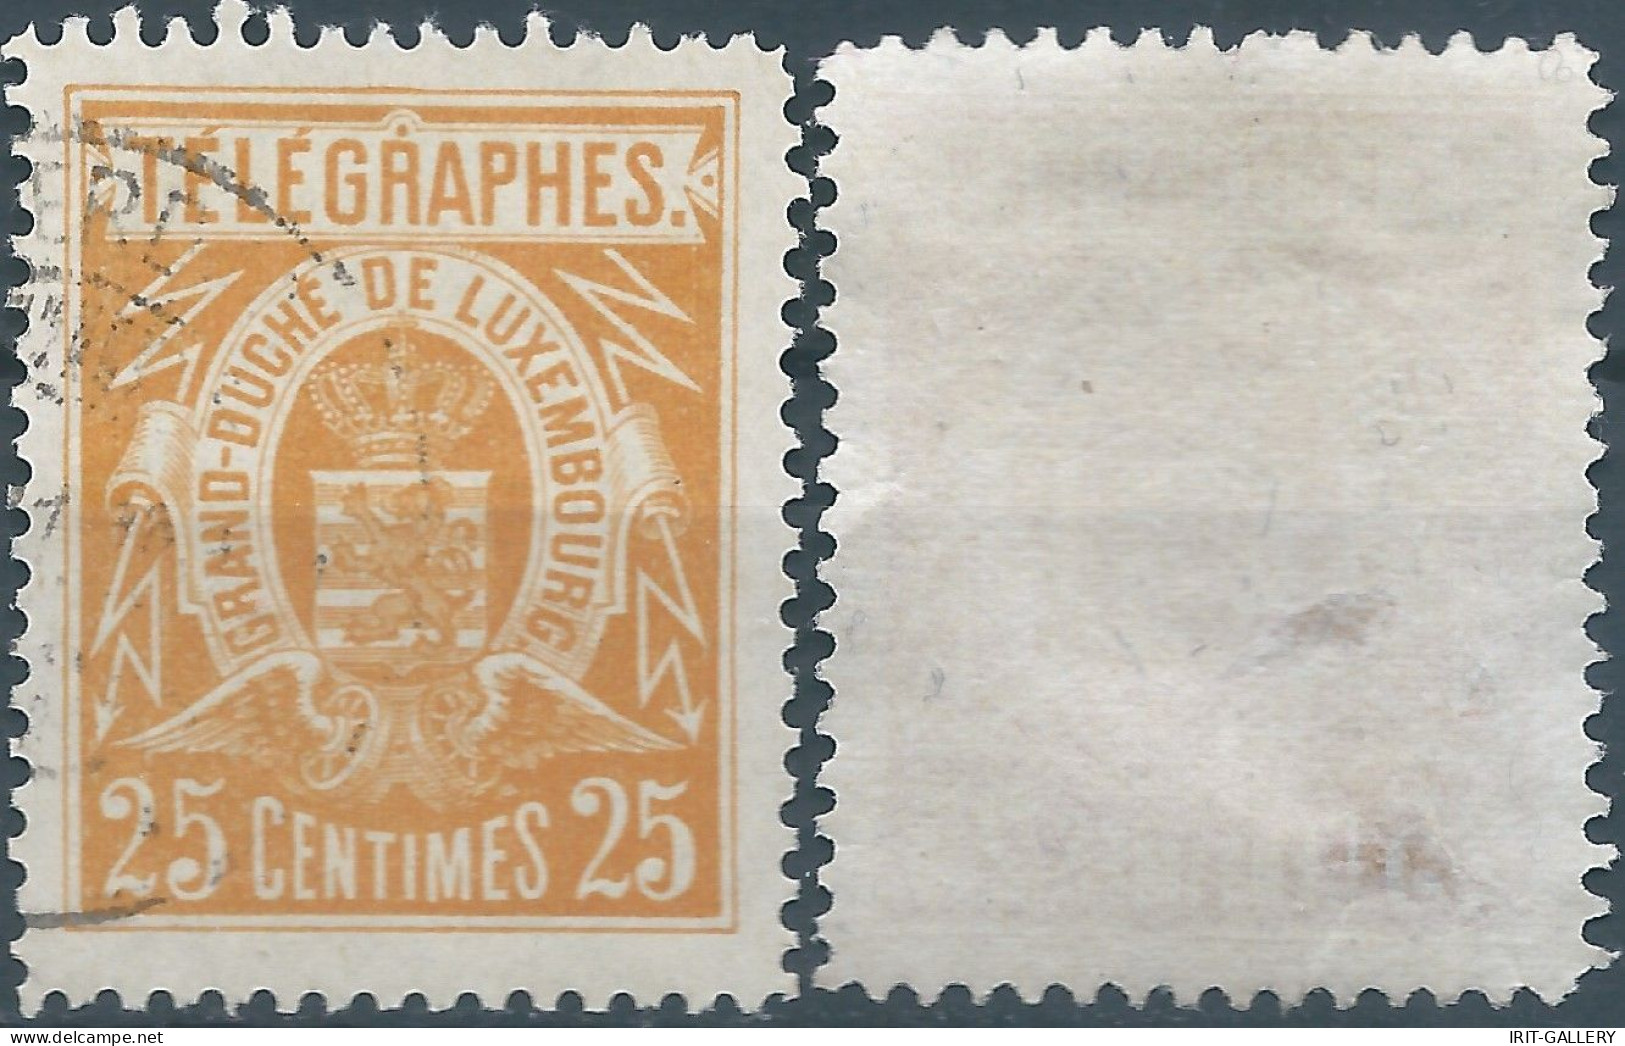 Lussemburgo - Luxembourg -TELEGRAPHES 1883 Telegraph Stamps,25C,Used & Not Cancelled, Mint - Telegrafen